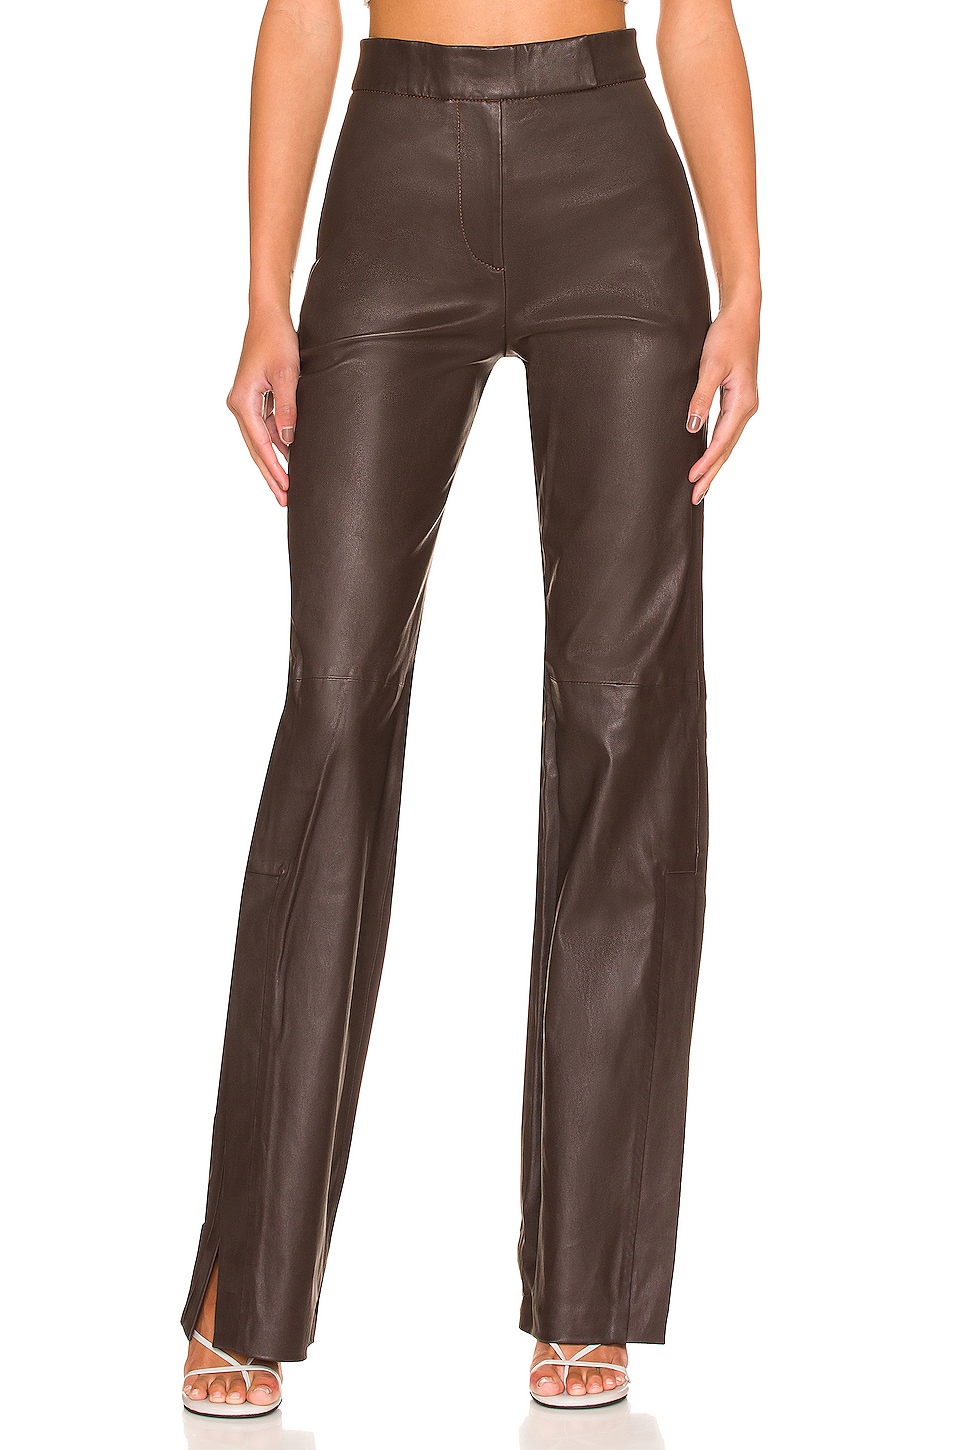 Chocolate Faux Leather Seam Split Trousers